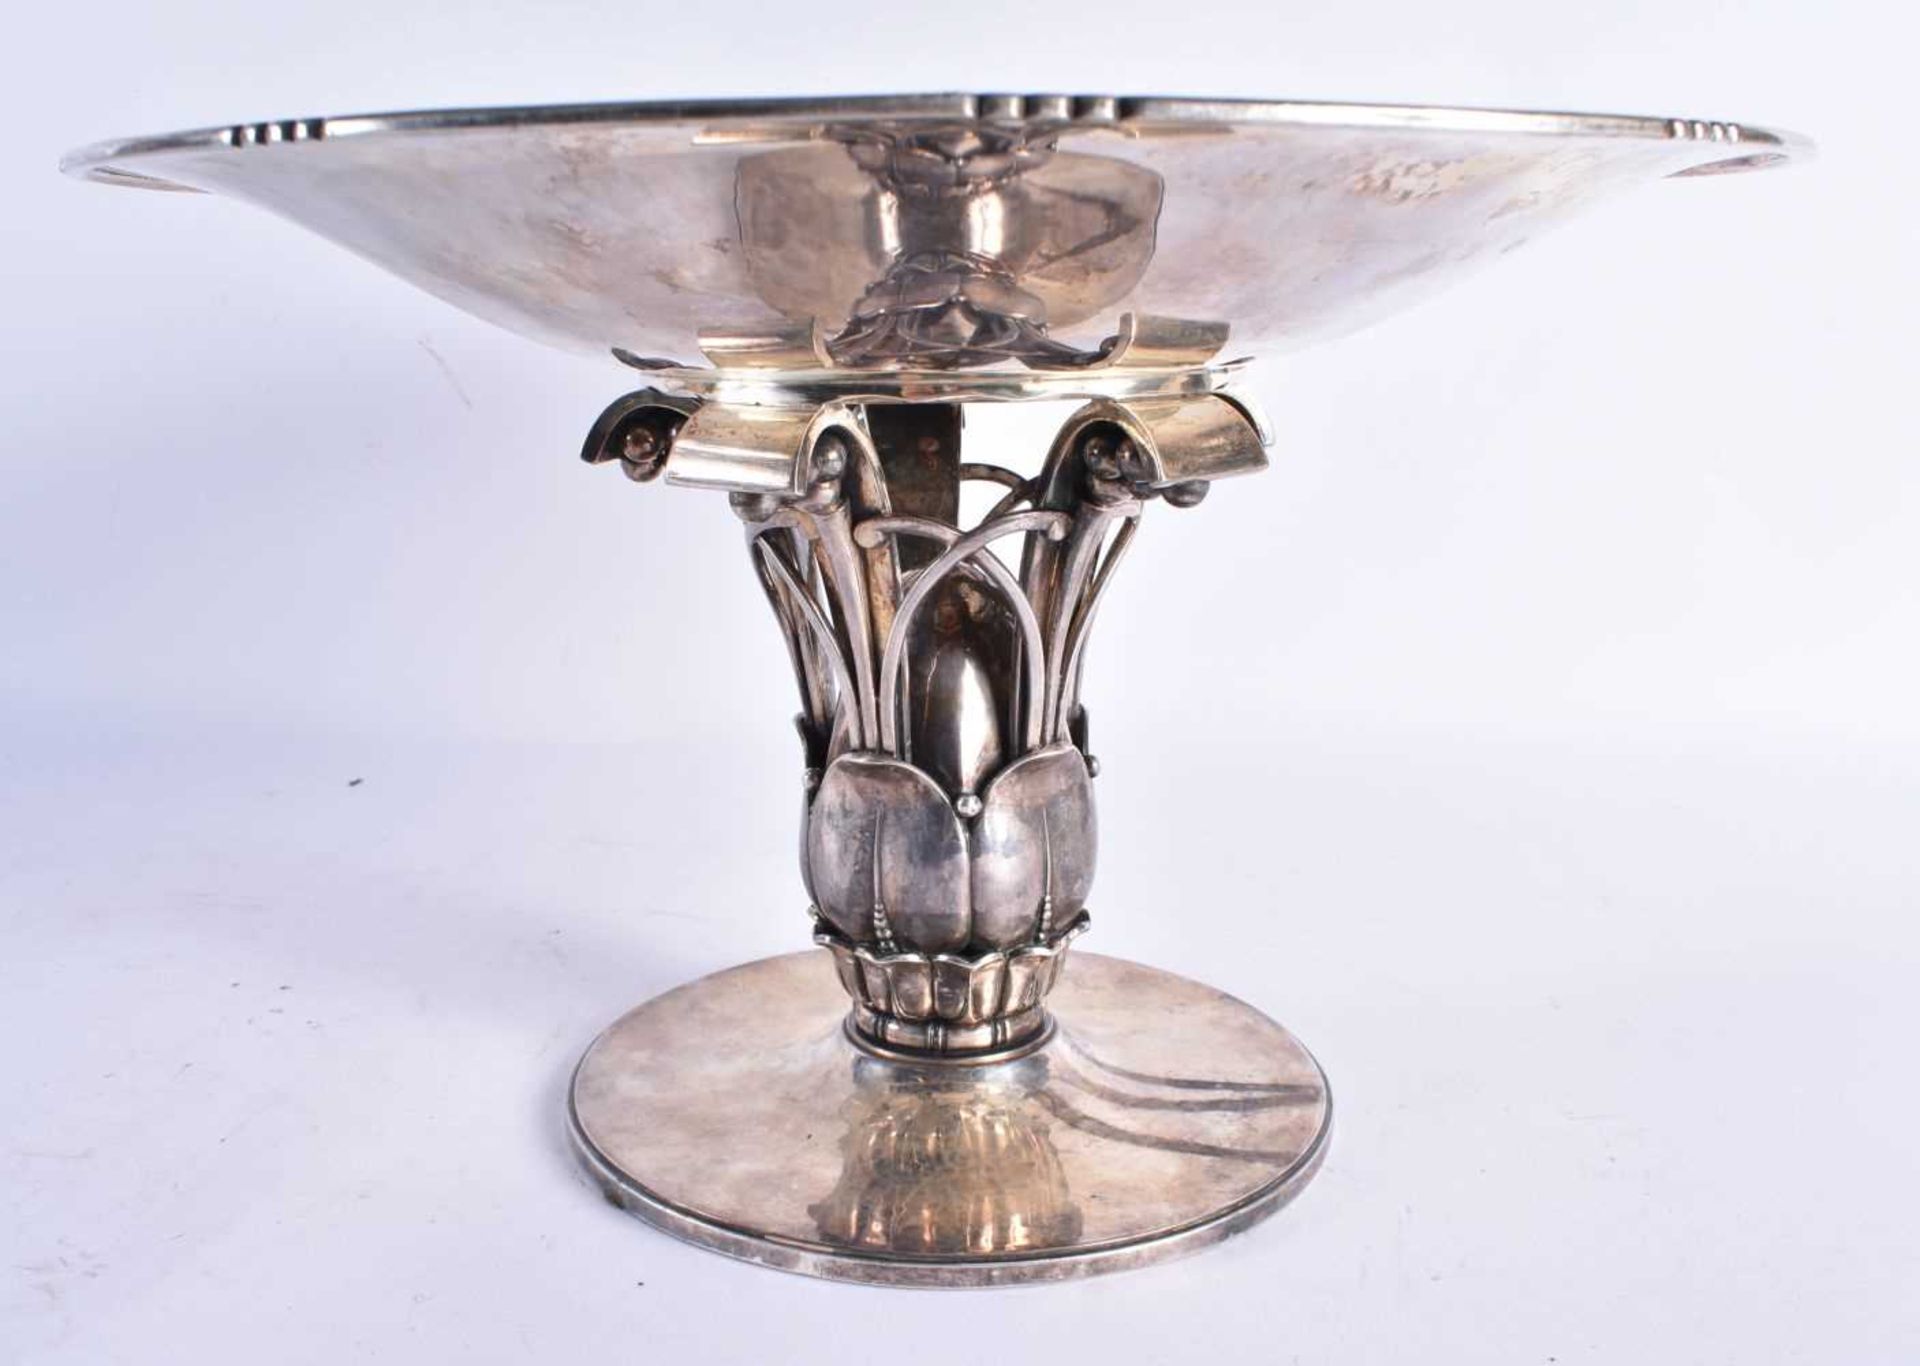 A LOVELY LARGE ENGLISH SILVER ART NOUVEAU STYLE PEDESTAL BOWL by Robert Edgar Stone, formed with a - Image 4 of 6